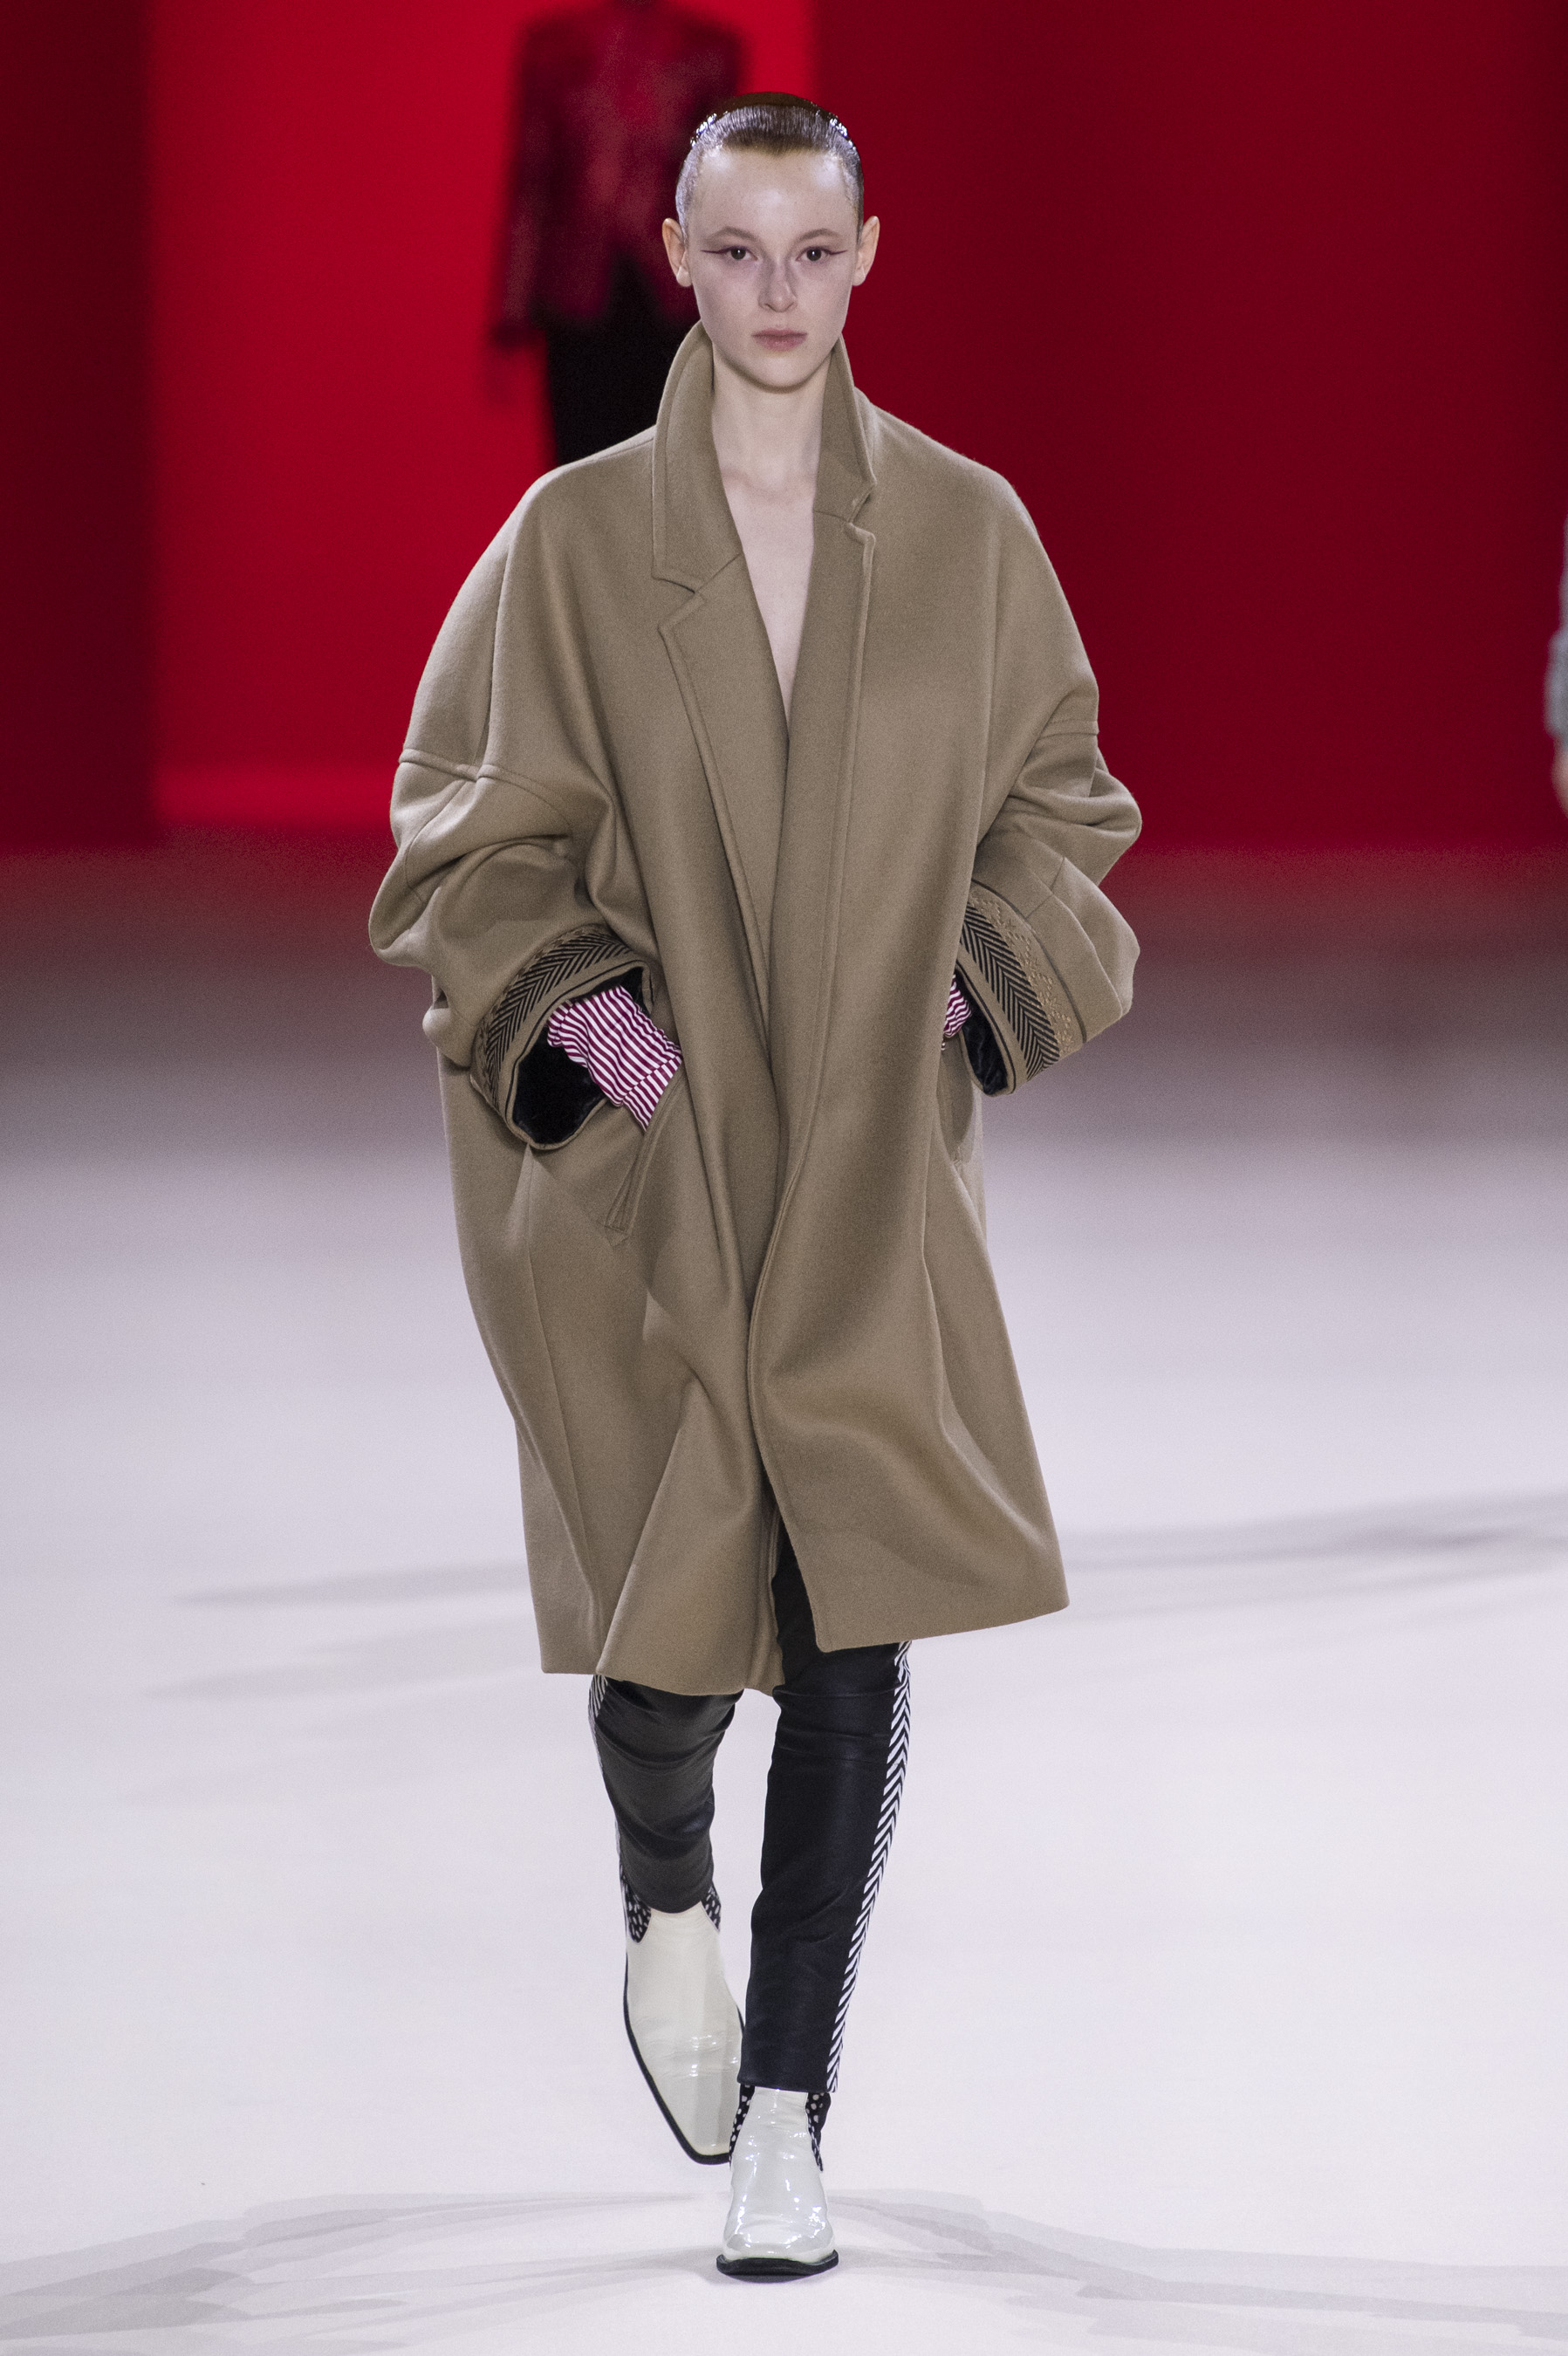 Top 10 'Other' Fashion Shows of the Fall 2019 Season | The Impression